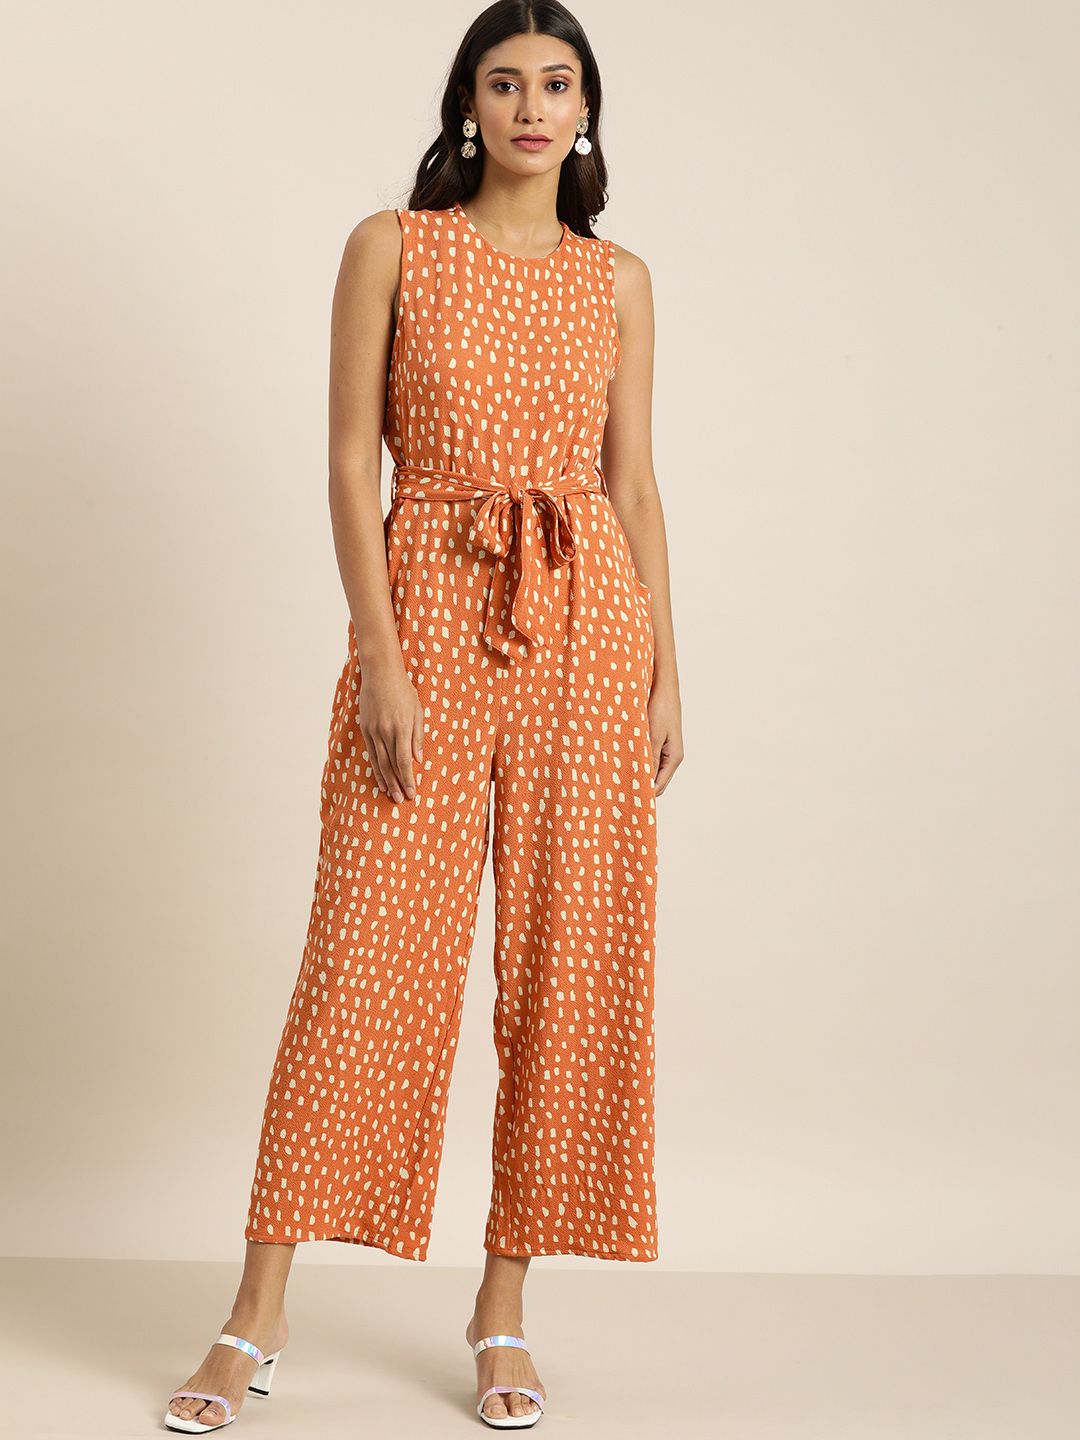 all about you Orange Printed Basic Jumpsuit Price in India